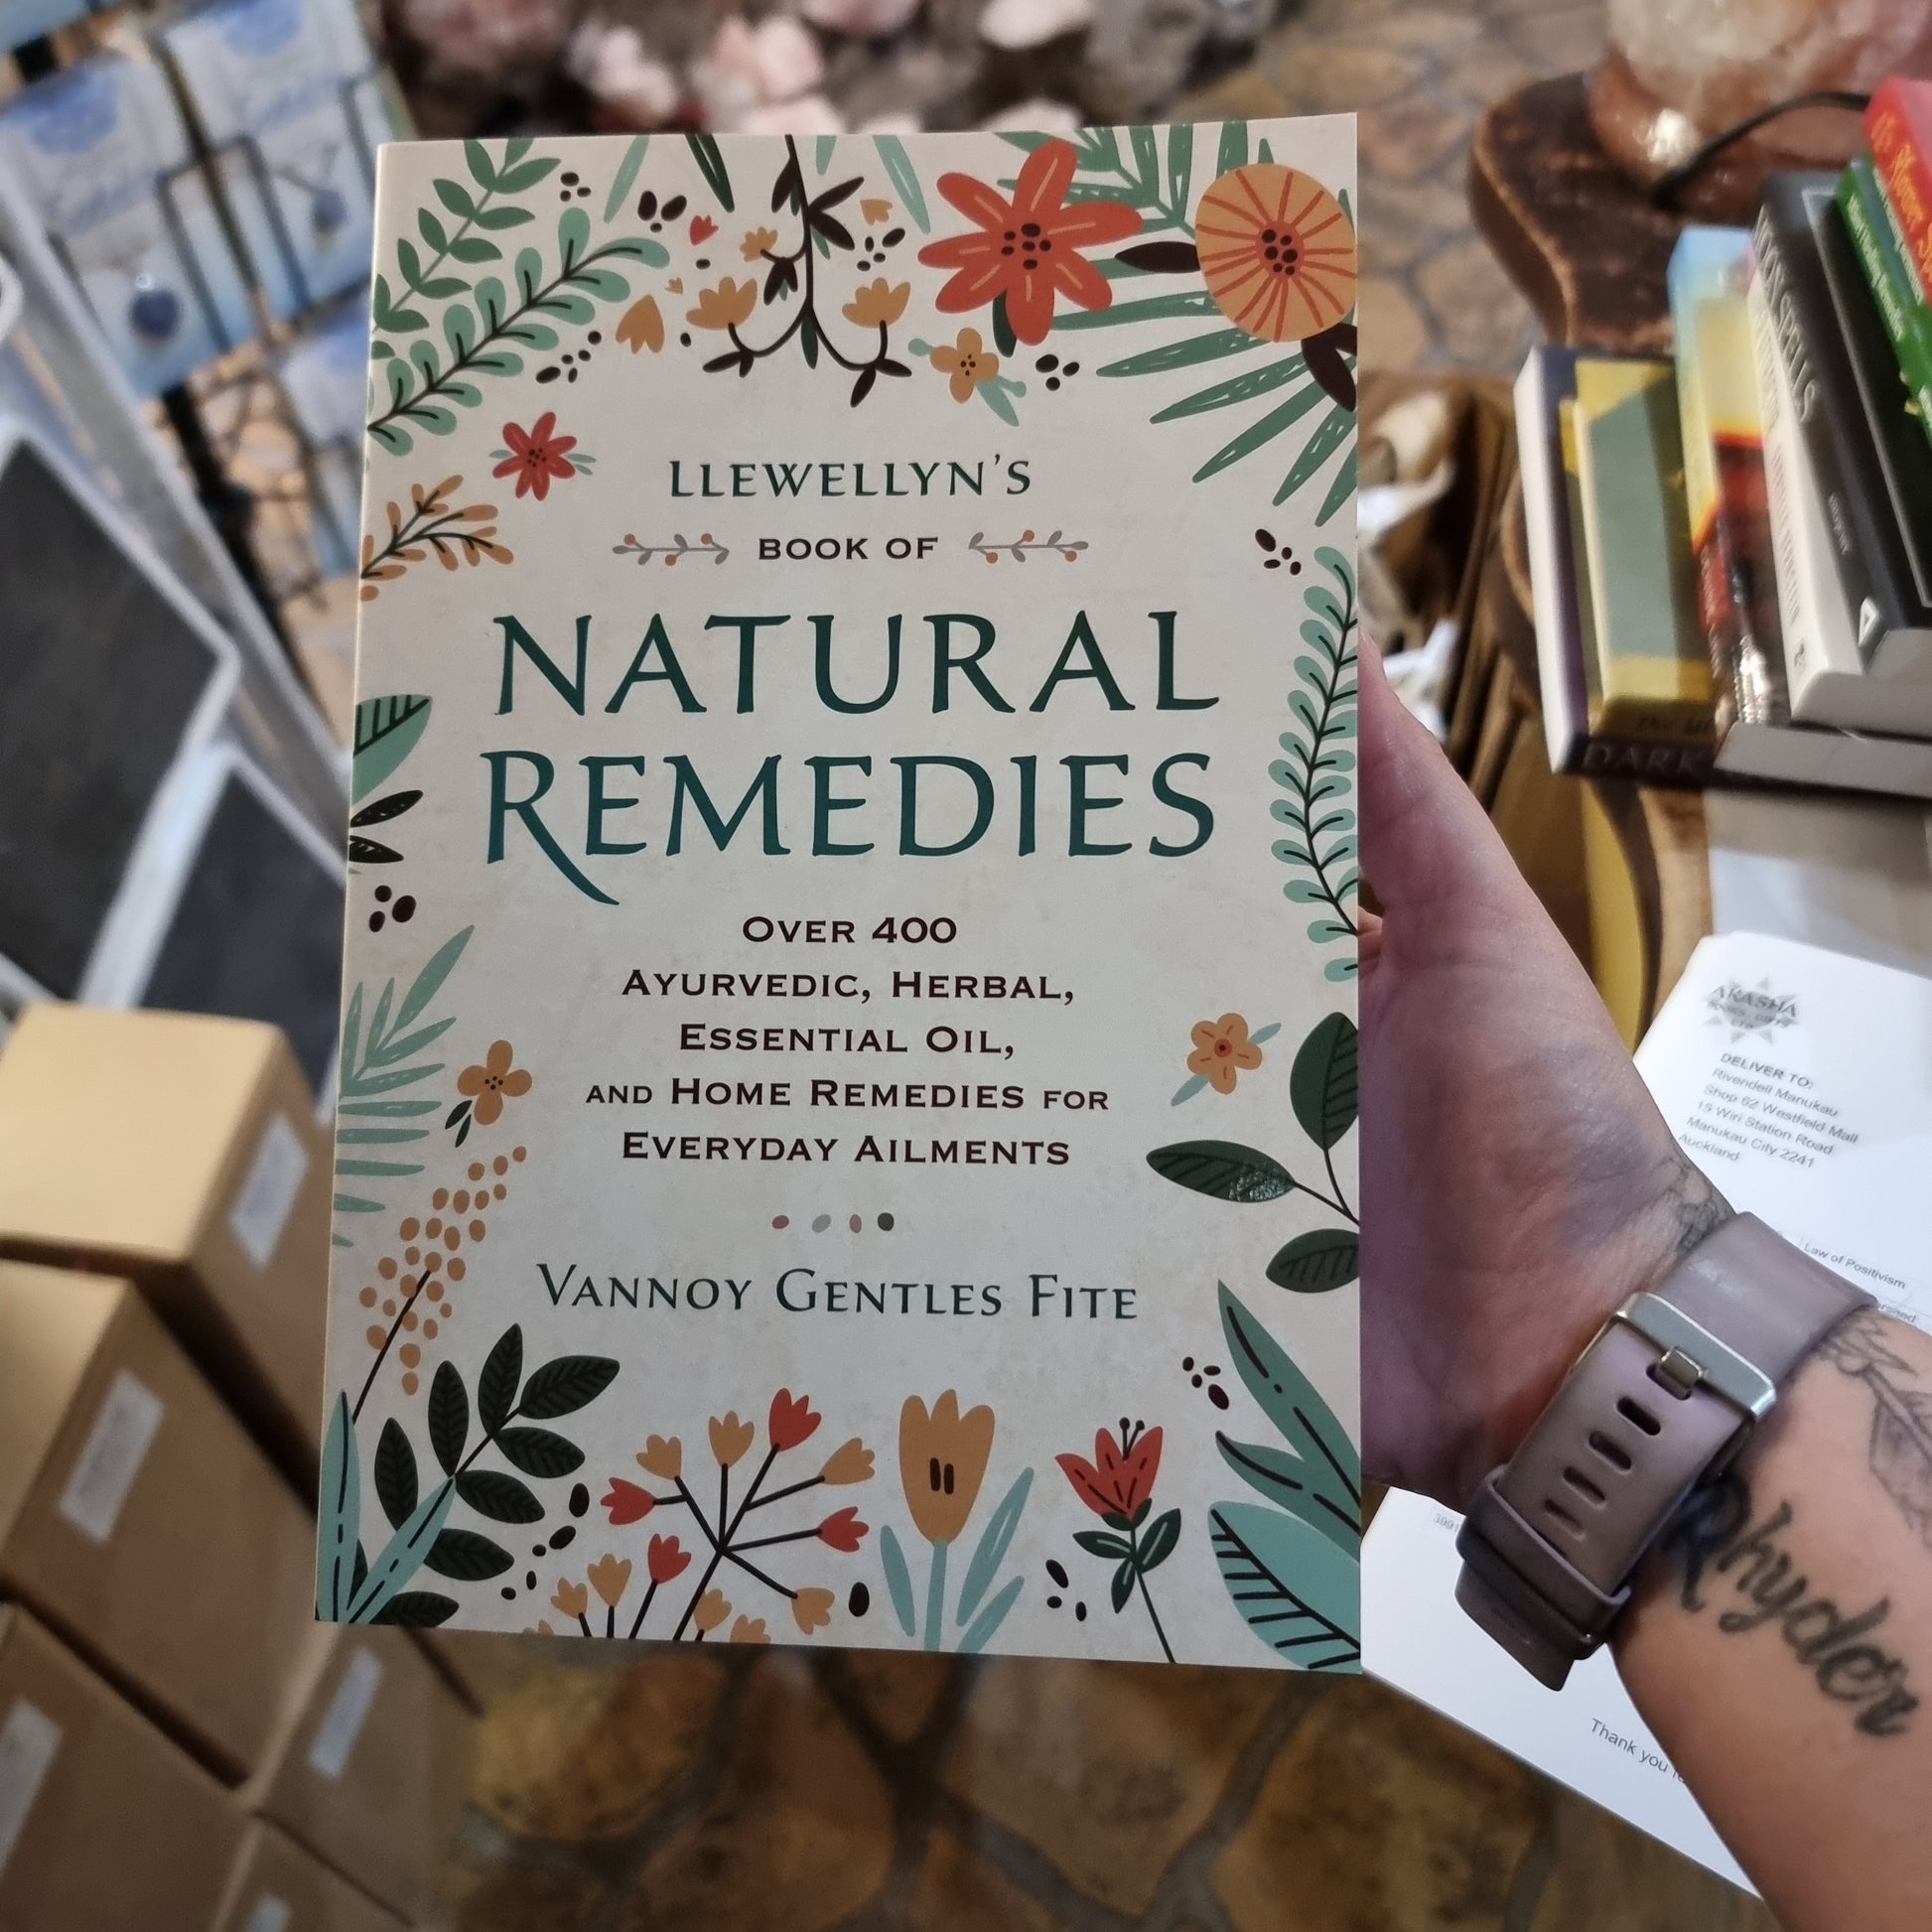 Llewellyns book of natural remedies - Rivendell Shop